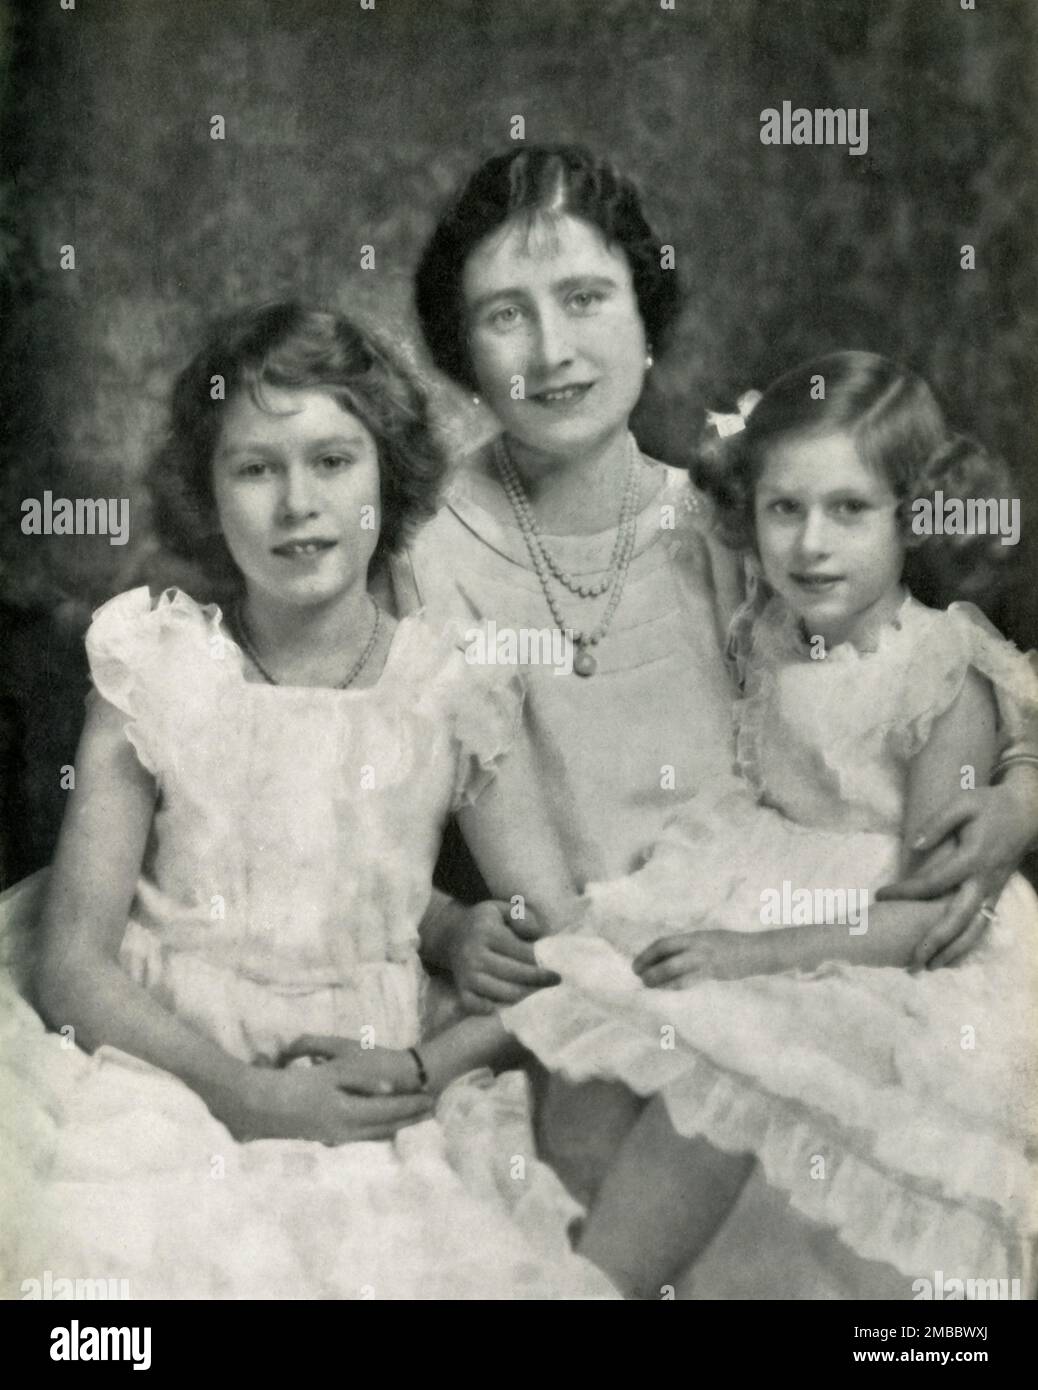 'Three Royal Ladies - 1937', 1947. The future Queen Elizabeth II with her mother Queen Elizabeth and younger sister Princess Margaret Rose. From &quot;Princess Elizabeth: The Illustrated Story of Twenty-one Years in the Life of the Heir Presumptive&quot;, by Dermot Morrah. [Odhams Press Limited, London, 1947] Stock Photo